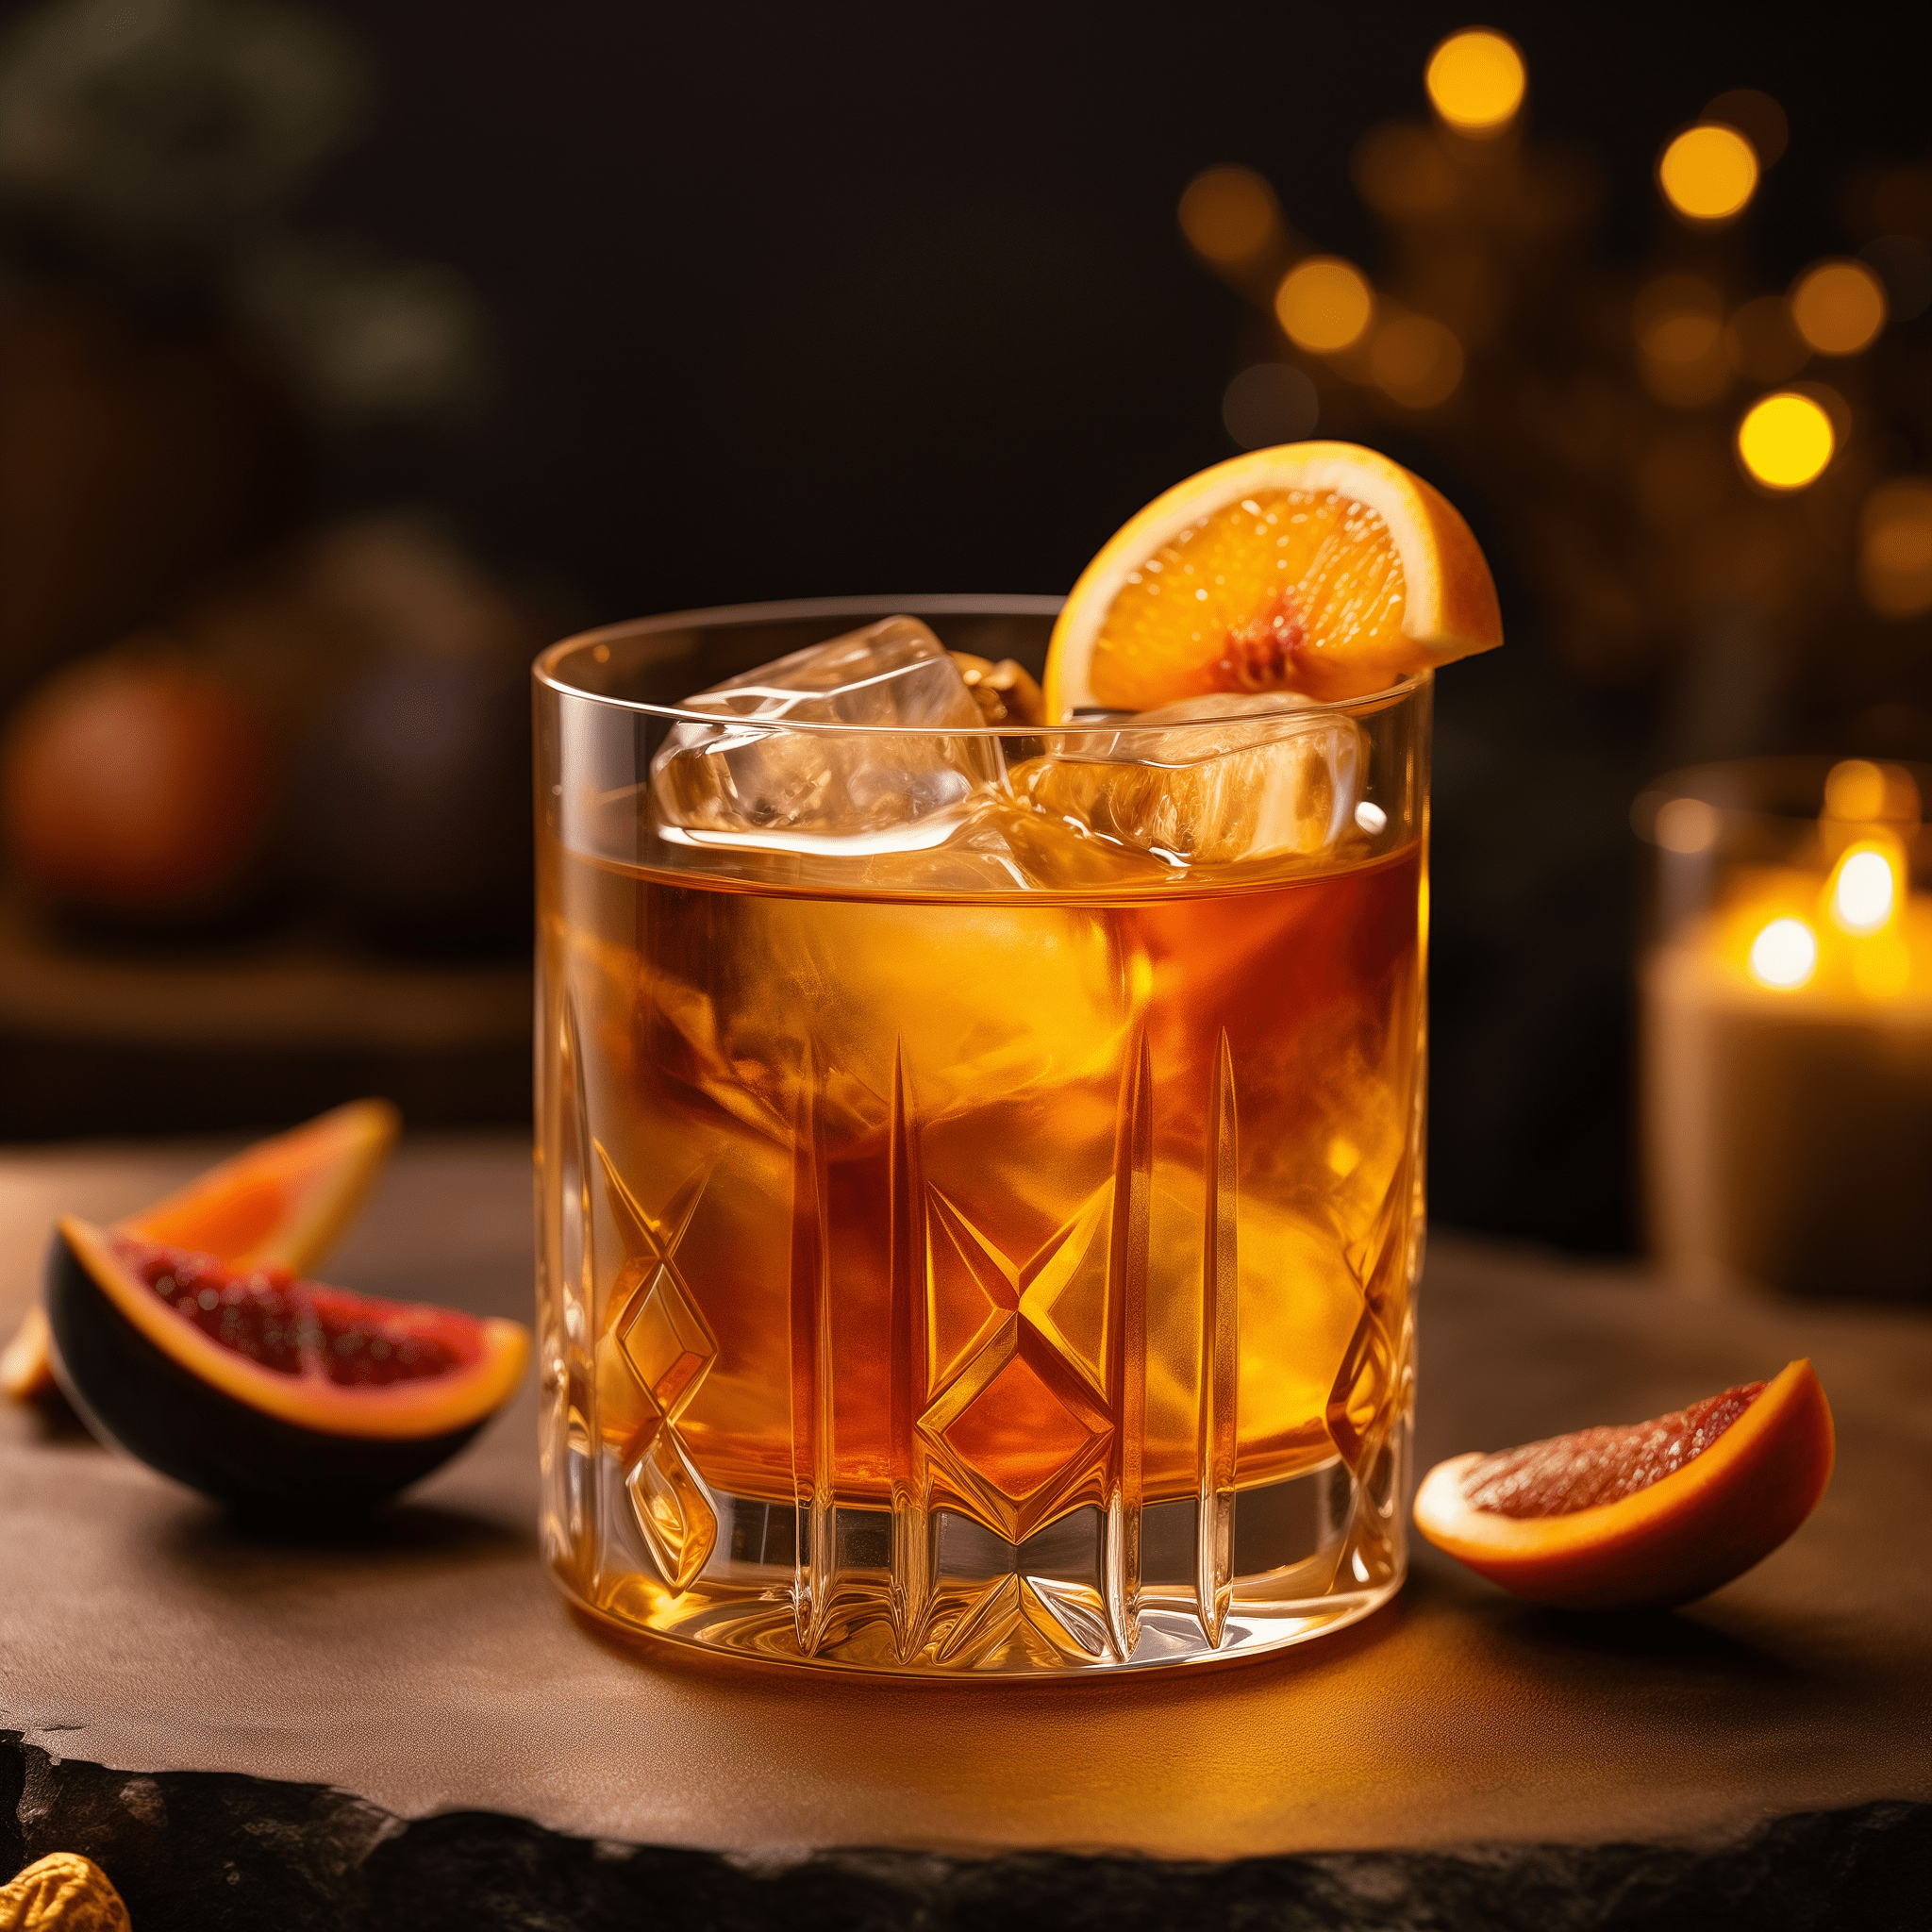 Fig Old Fashioned Cocktail Recipe - The Fig Old Fashioned has a rich, sweet profile with a deep undercurrent of fig flavor that pairs perfectly with the warmth of the whiskey. The bitters add a layer of complexity, and the citrus garnish provides a bright note to balance the sweetness.